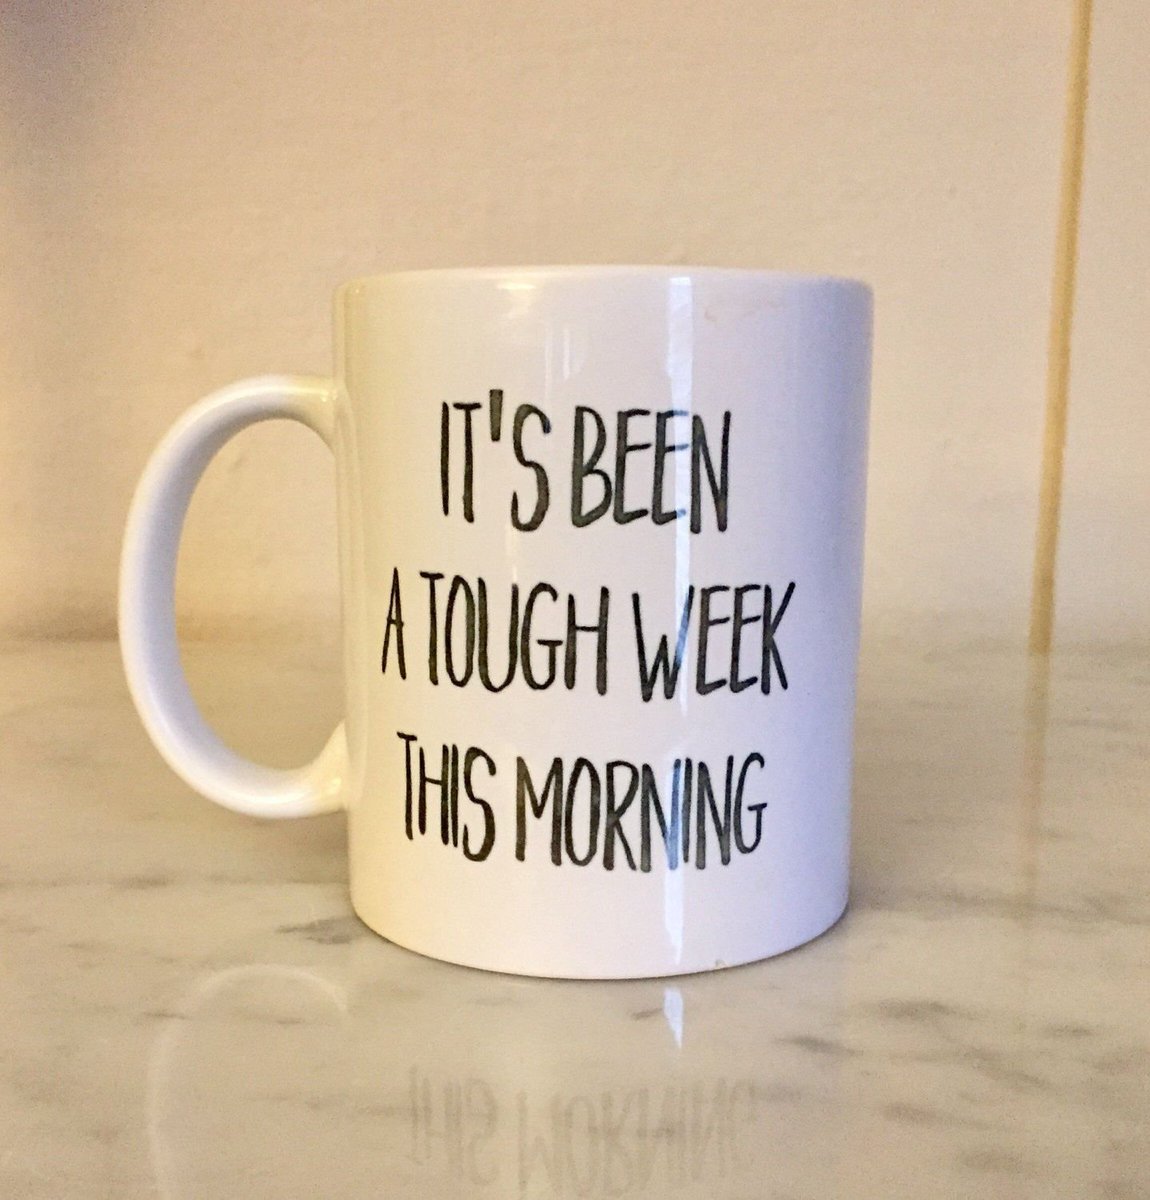 I feel this, lol. Let's get over that hump and onto the weekend! #Coffee